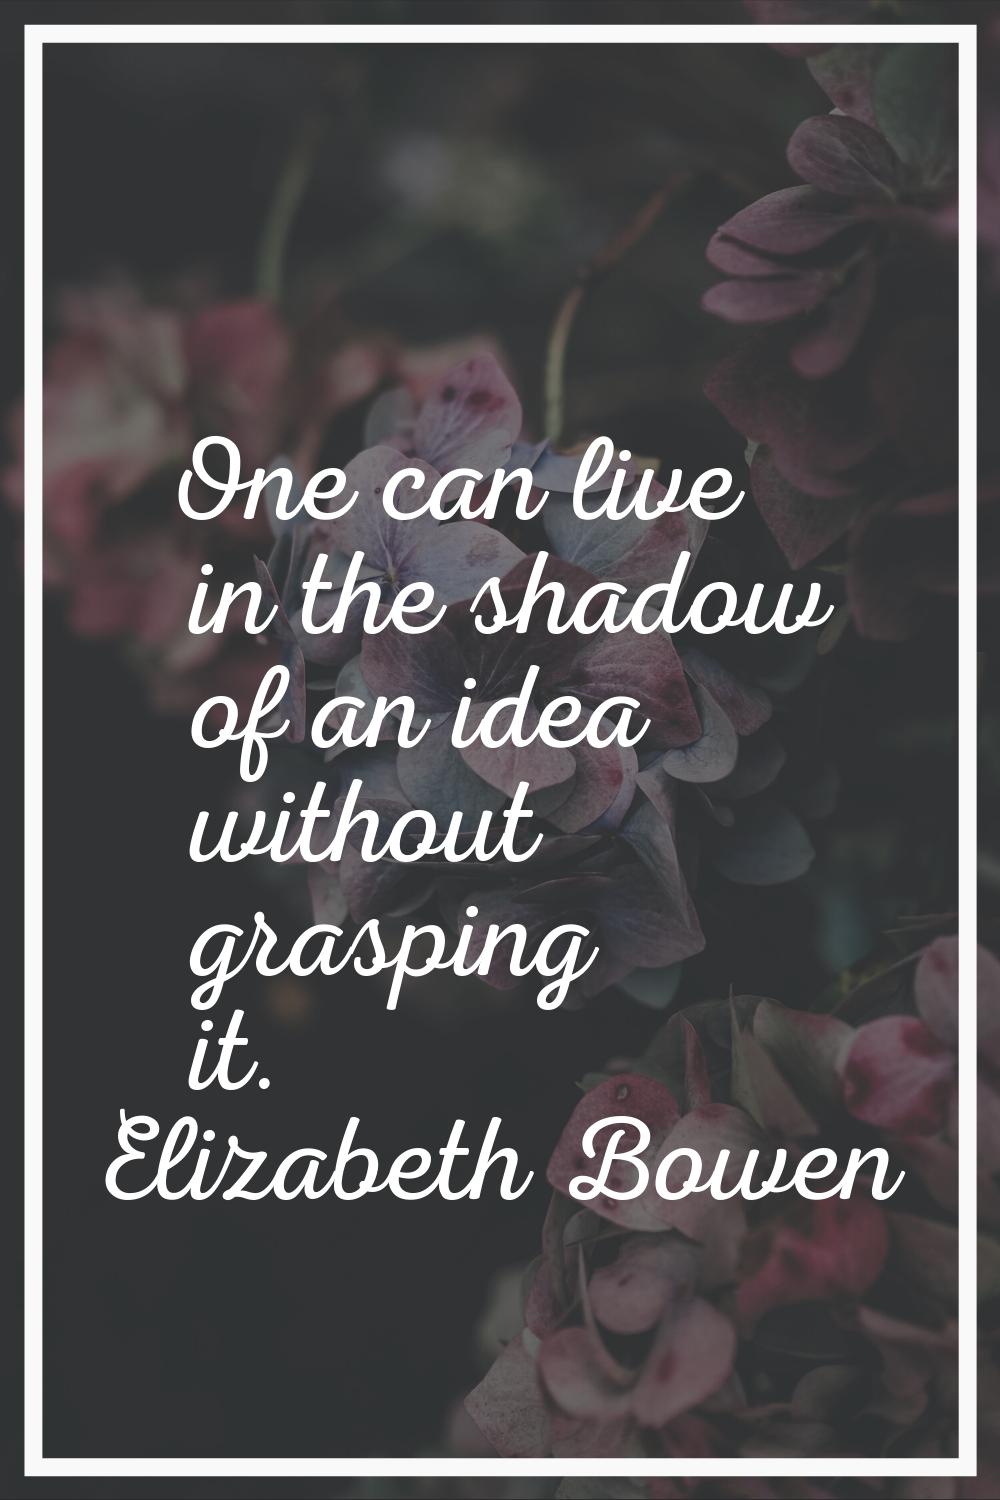 One can live in the shadow of an idea without grasping it.